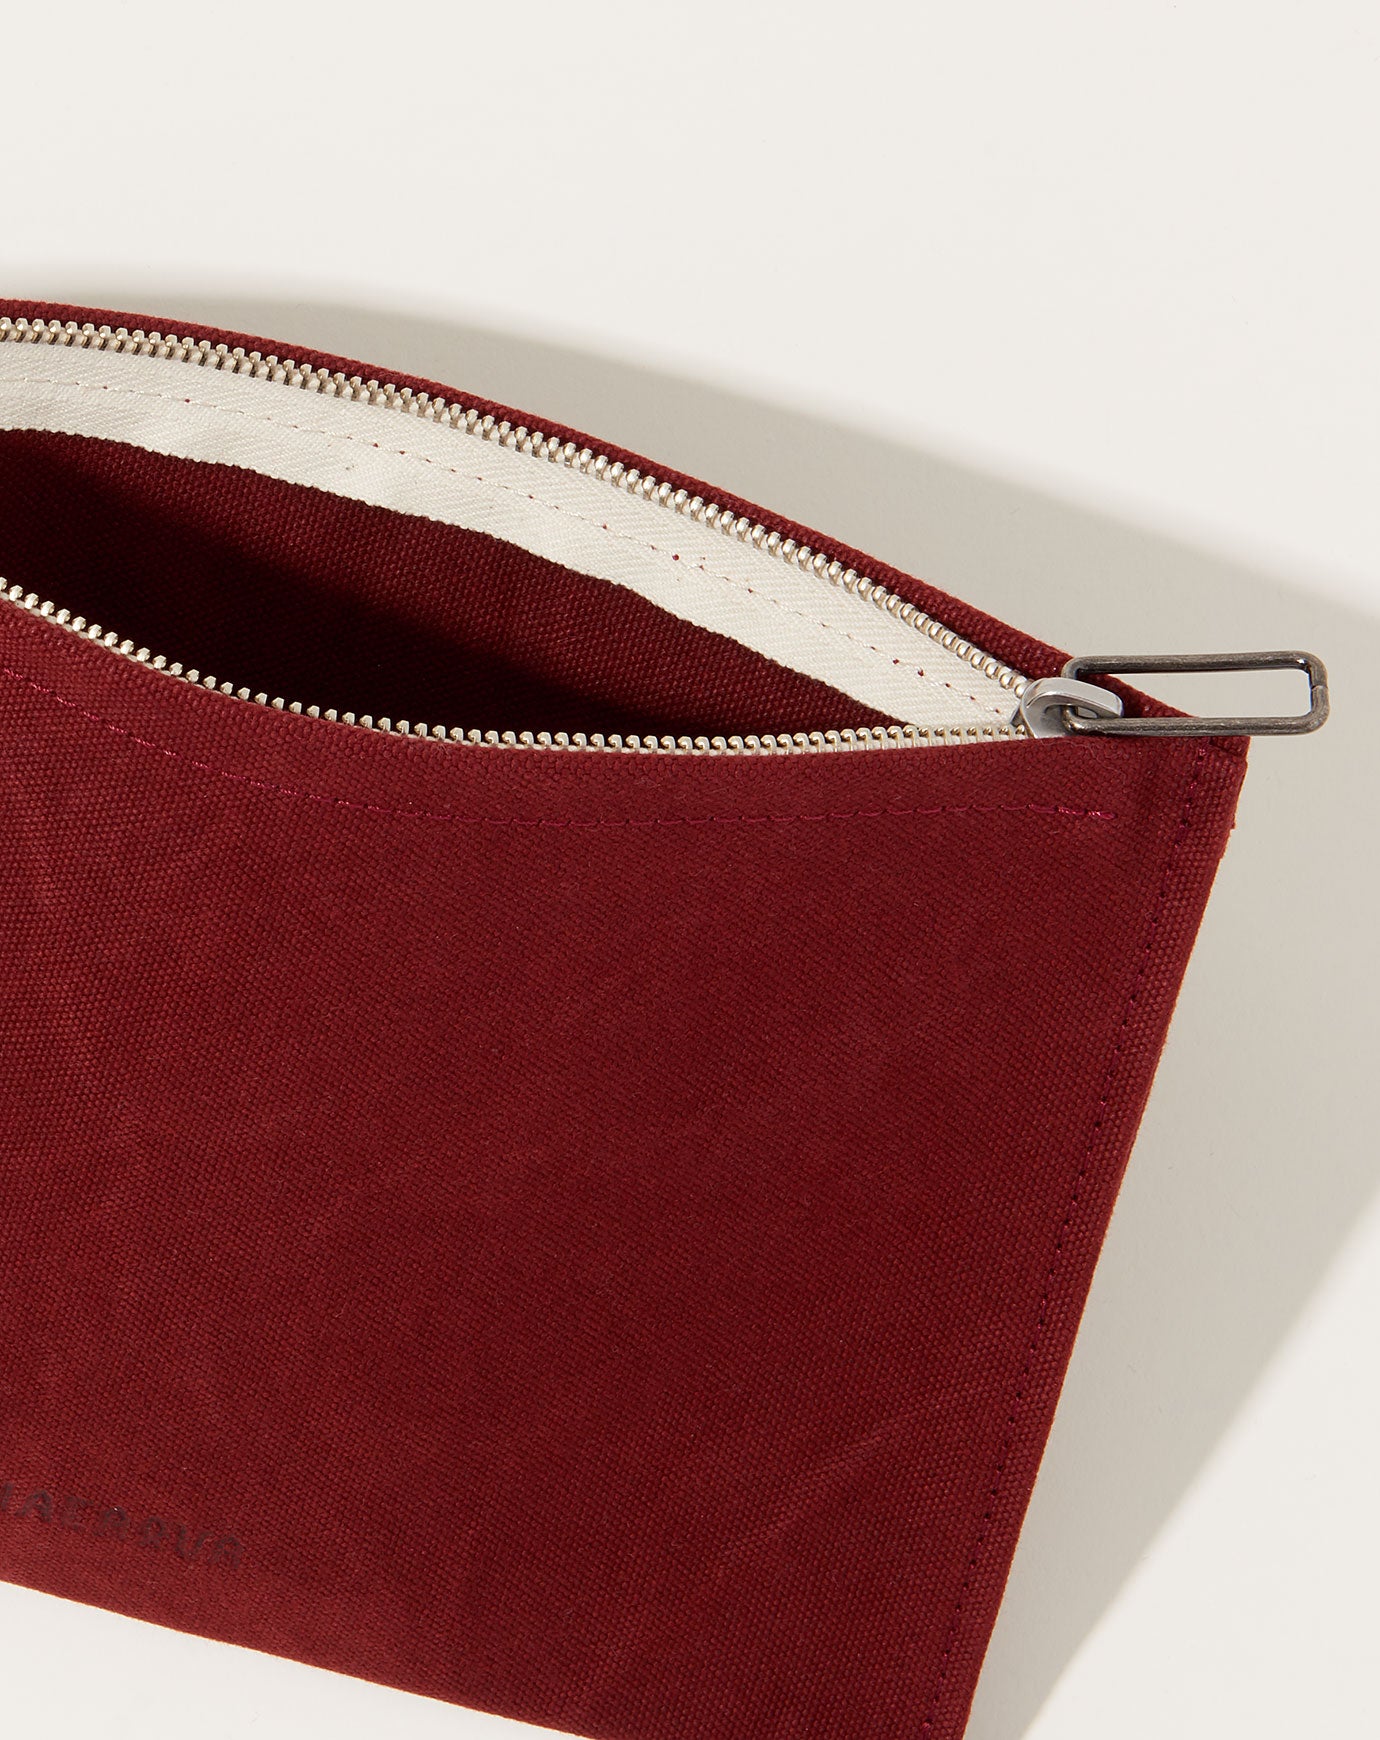 Amiacalva Washed Canvas Pouch in Burgundy